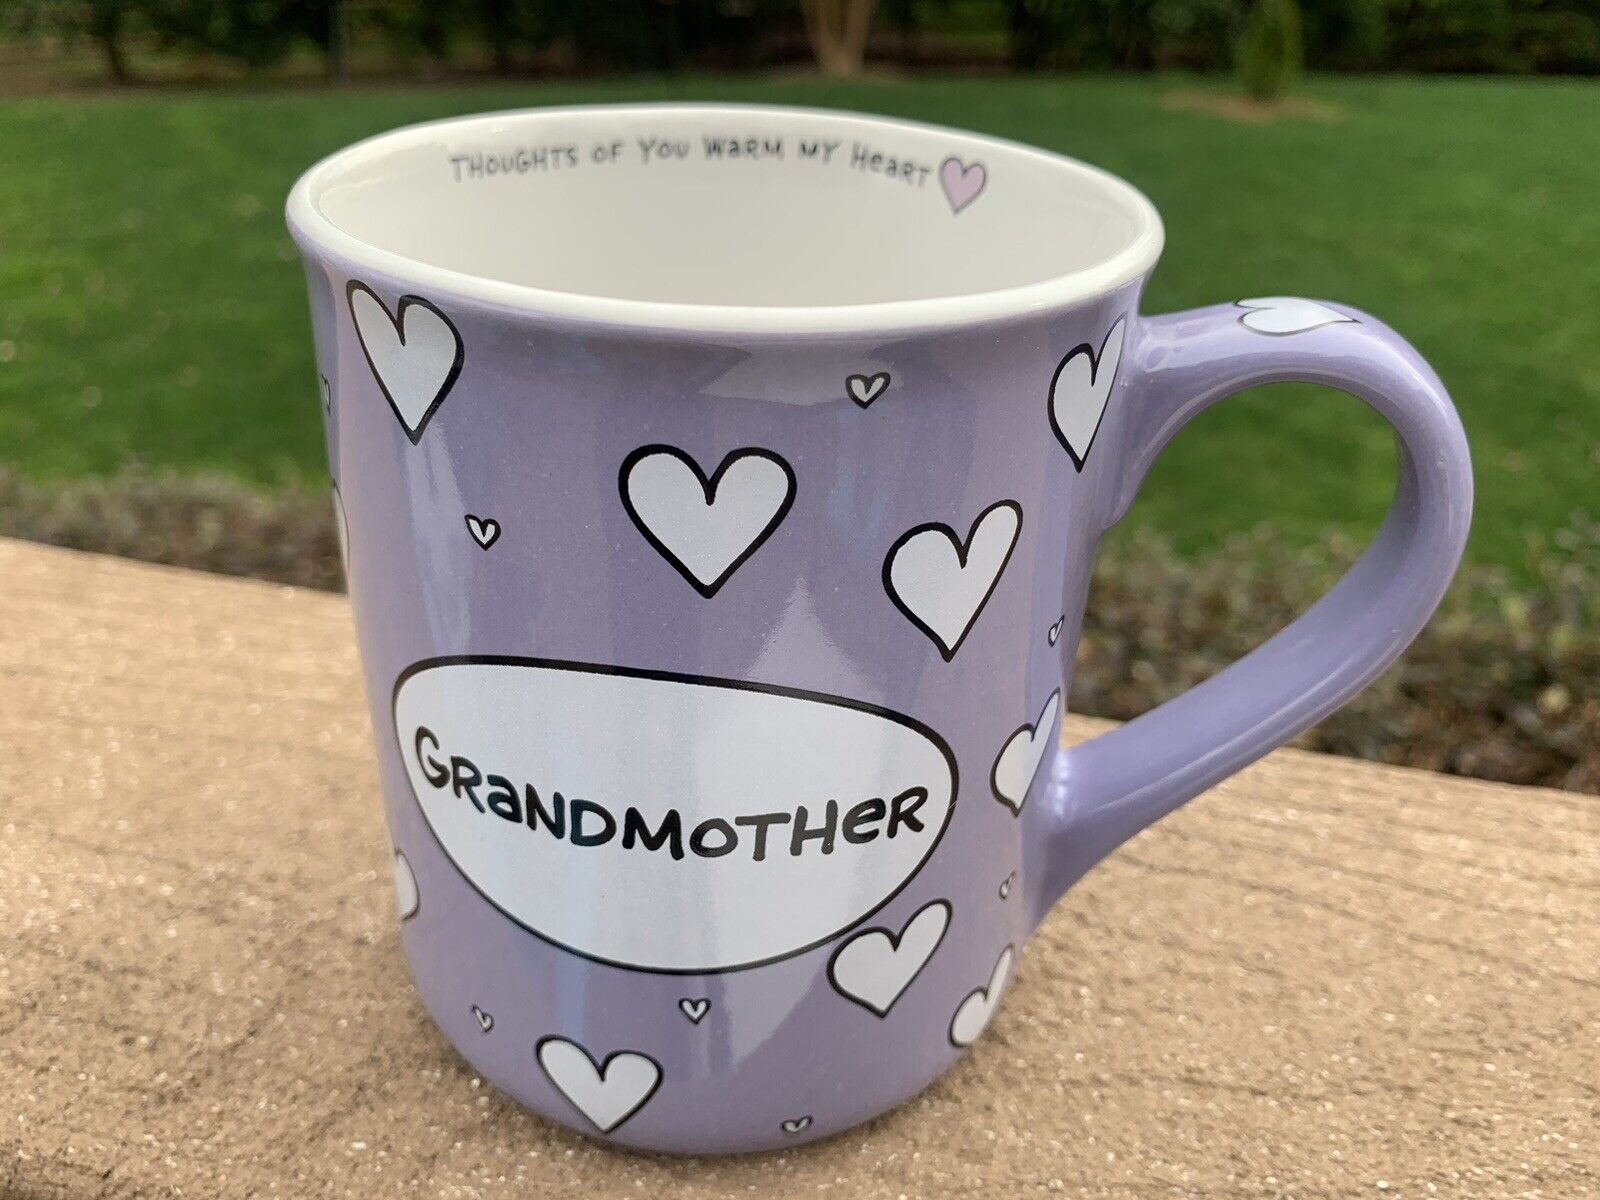 Our Name is Mud Lorrie Veasey Grandmother Coffee Cup 